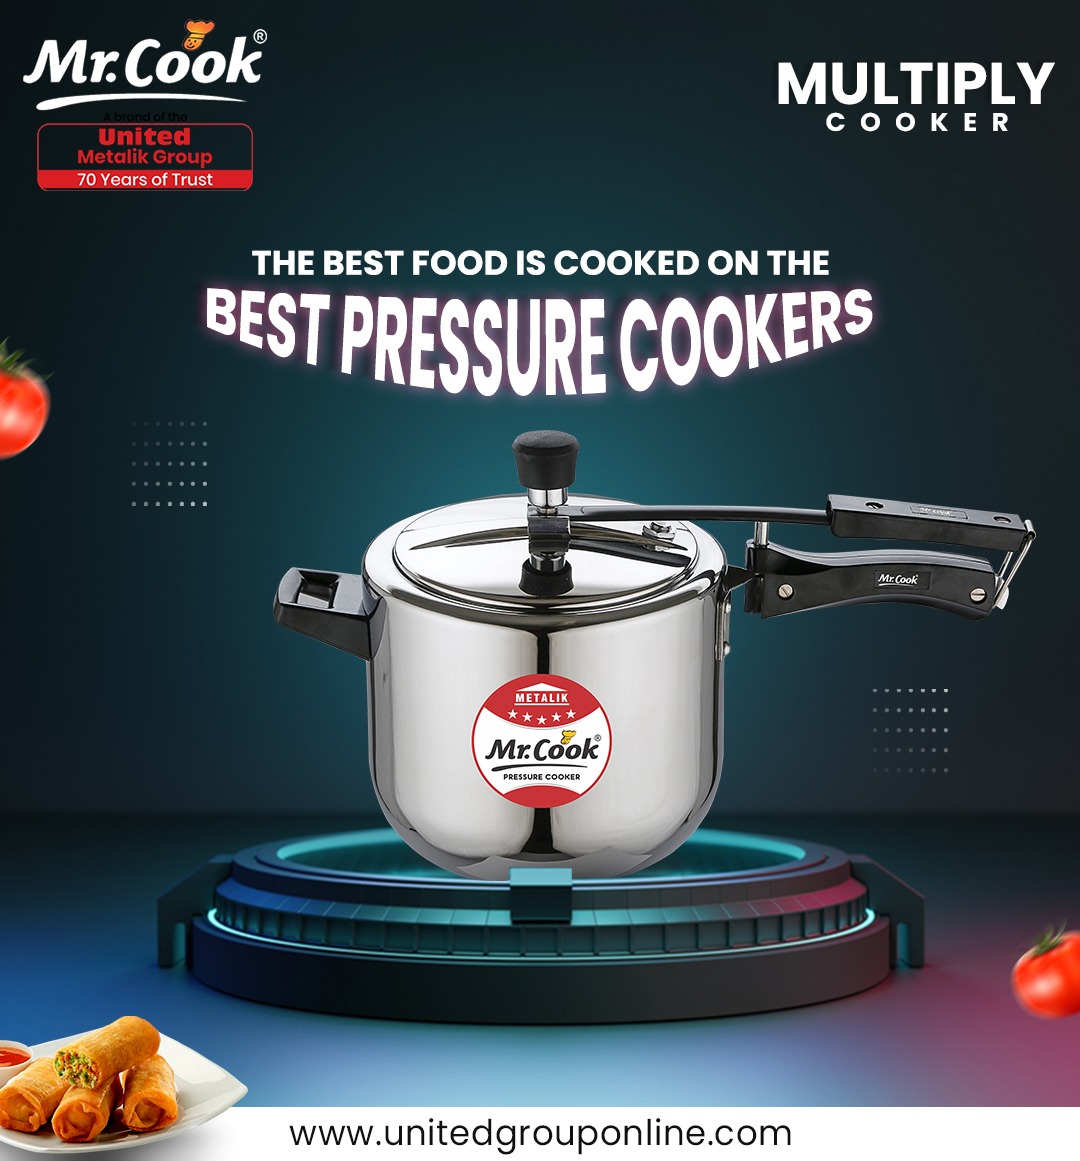 The best food is cooked on the best pressure cookers....
.
.
.
#mrcook #Cookers #Cookware #PressureCookers #HealthyCooking #Deep #roundedkadai
#RoundedTawa #Wok #Stwe #Pot #StainlessSteel
#Durable #Reliable #PremiumQuality #Tastyfood #Chefchoice
#Qualityproduct